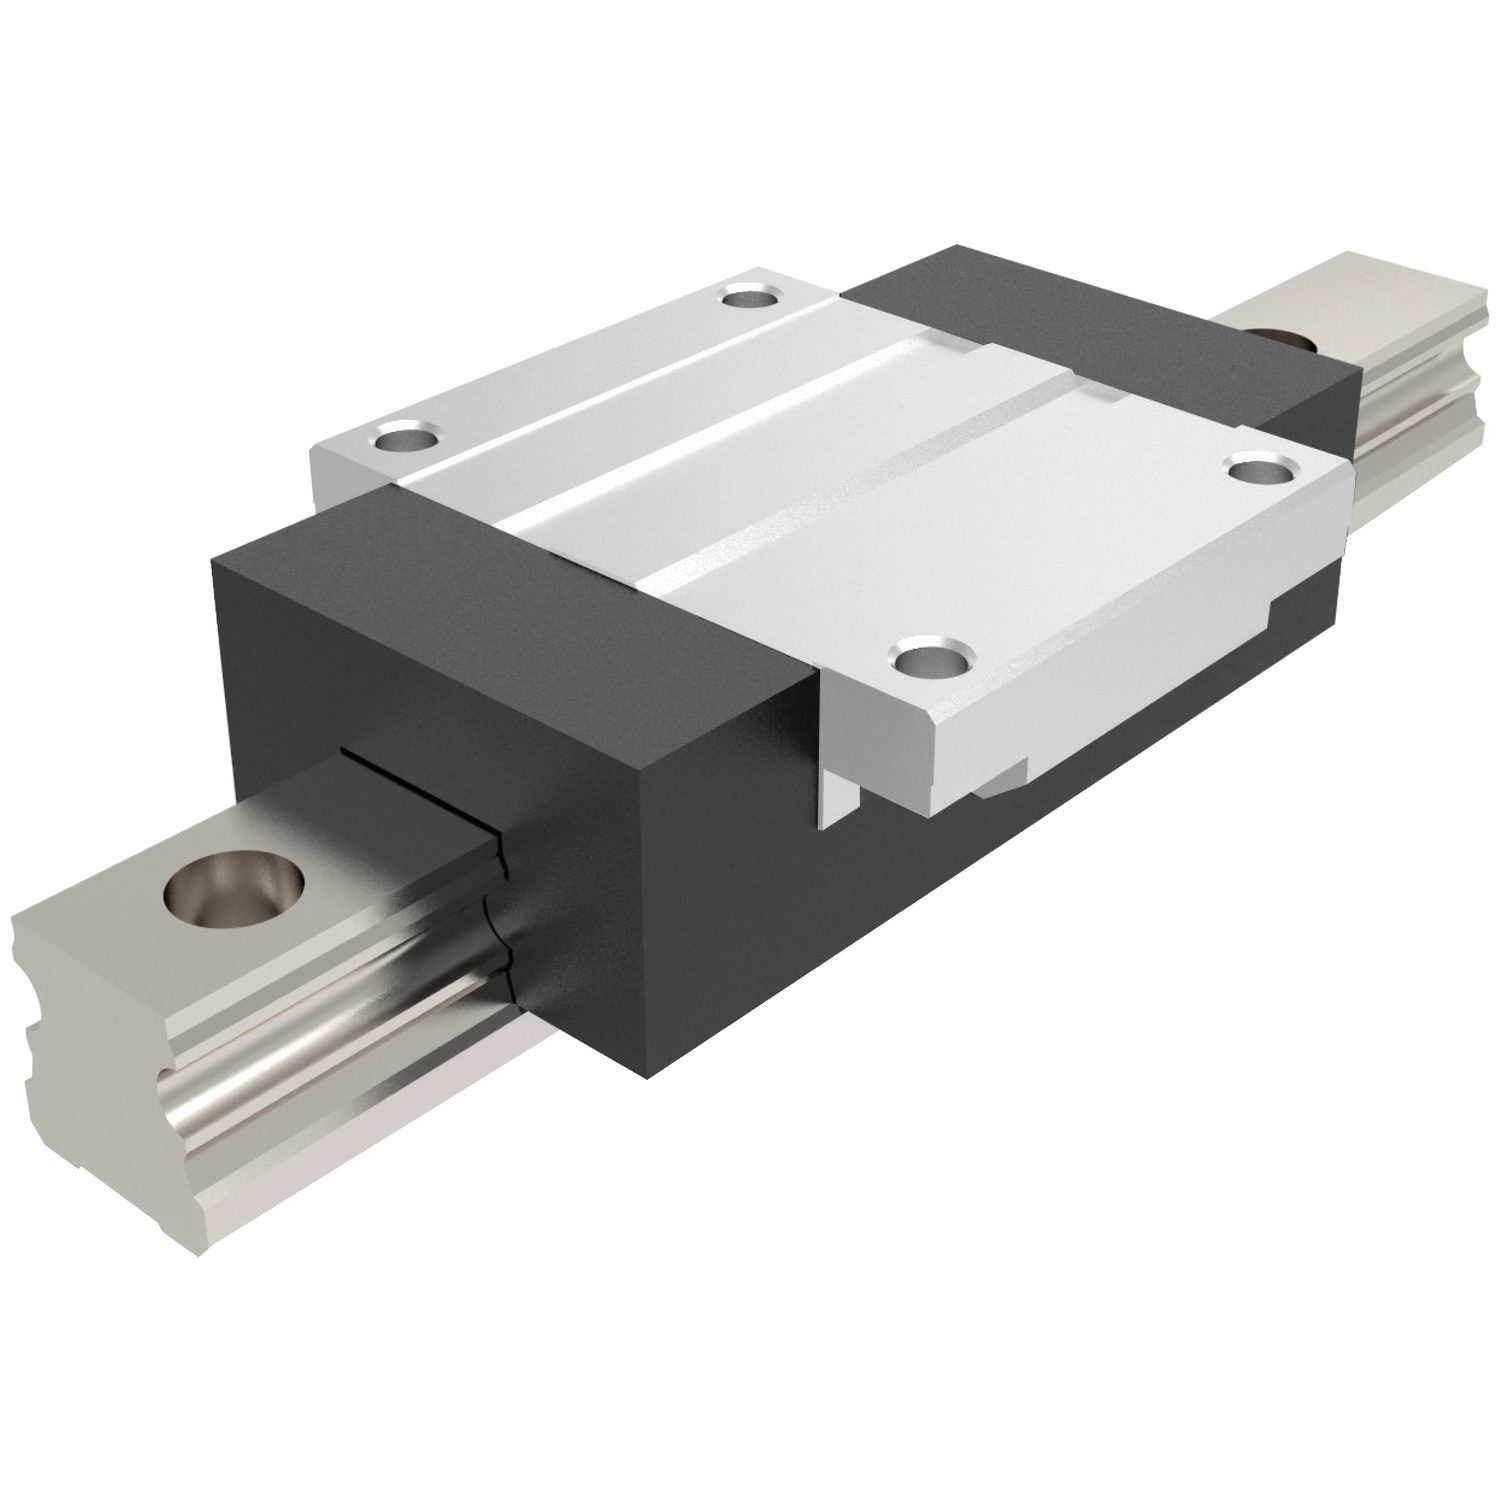 Aluminium Guideways Our anodised aluminium linear guides offer a 60% weight reduction over standard steel or stainless steel. They contain hardened stainless steel raceways for added durability. 15, 20 and 25mm versions available. Compatible with standard carriages (e.g. L1016.F) or special aluminium carriages L1018.F and L1018.U.